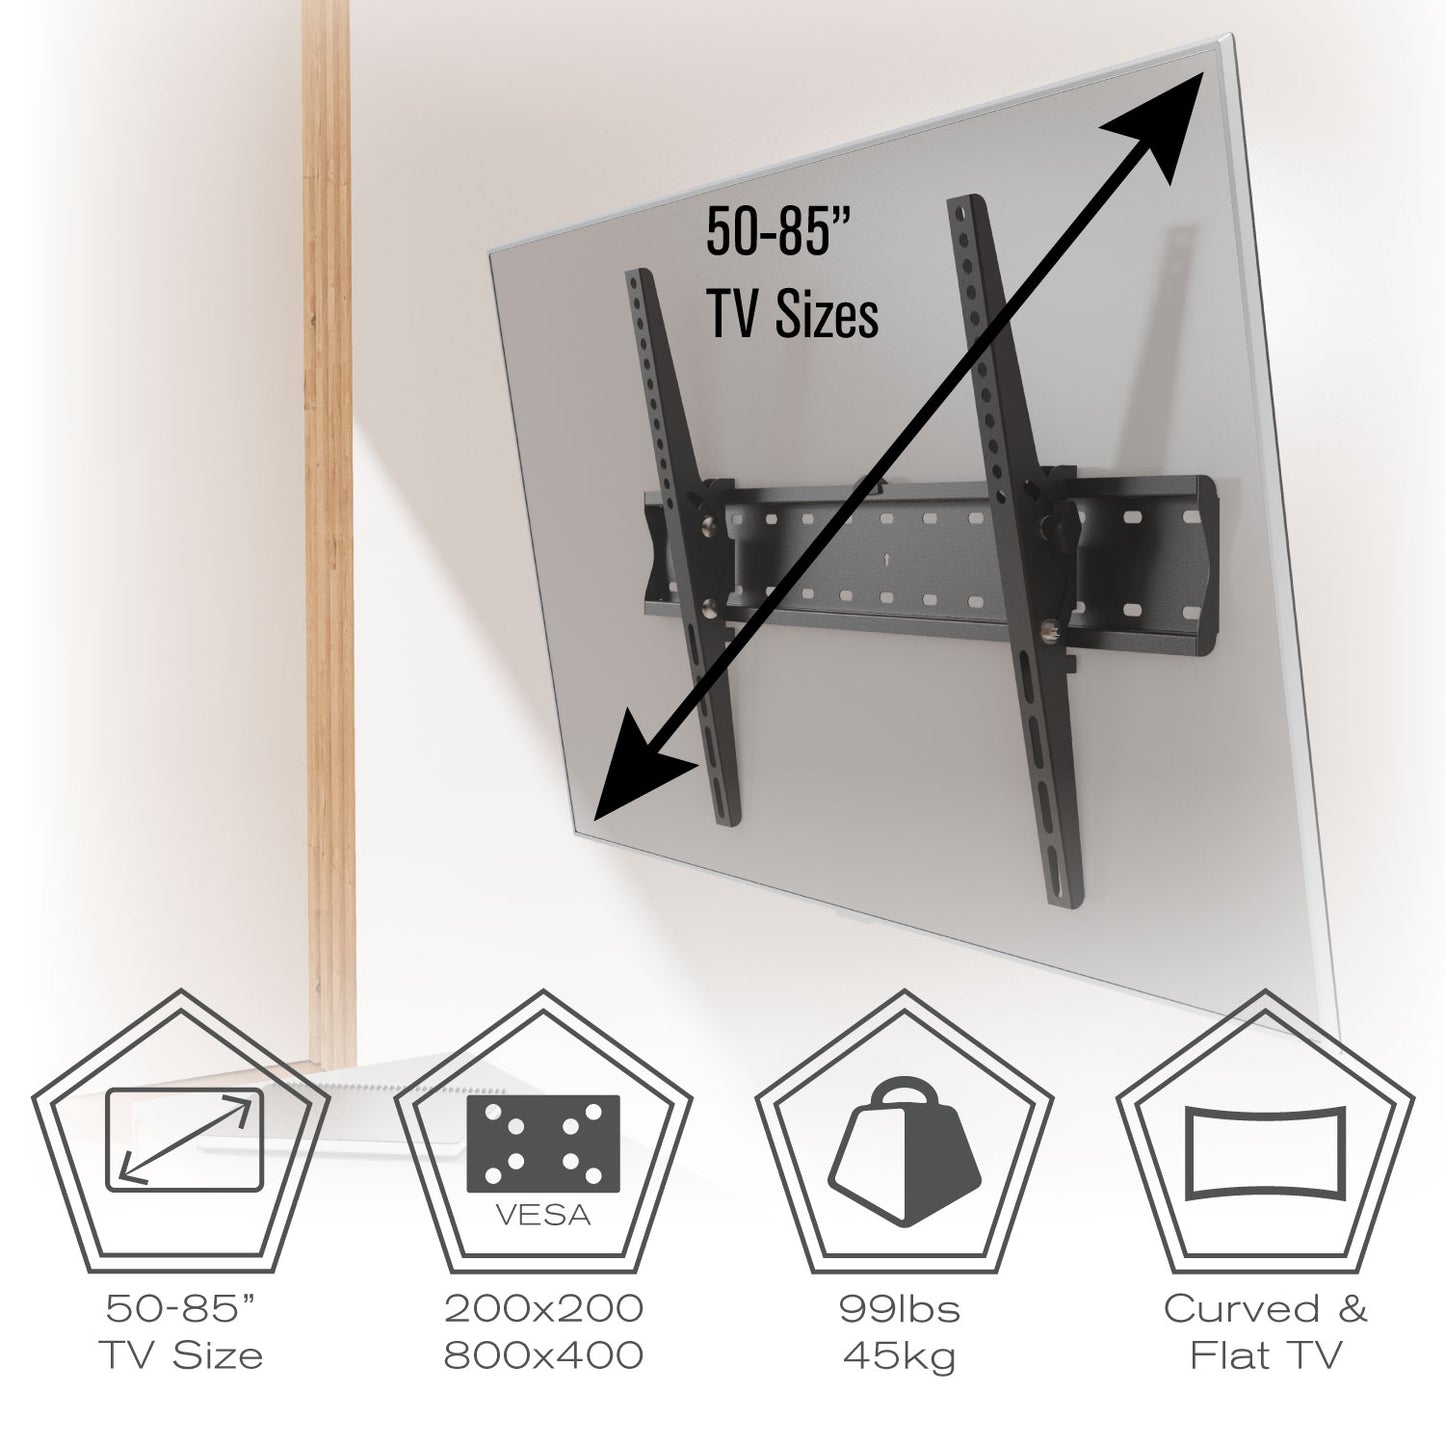 ProMounts Tilting TV Mount for 50" to 85" TVs Holds up to 99Ibs (AMT8401)